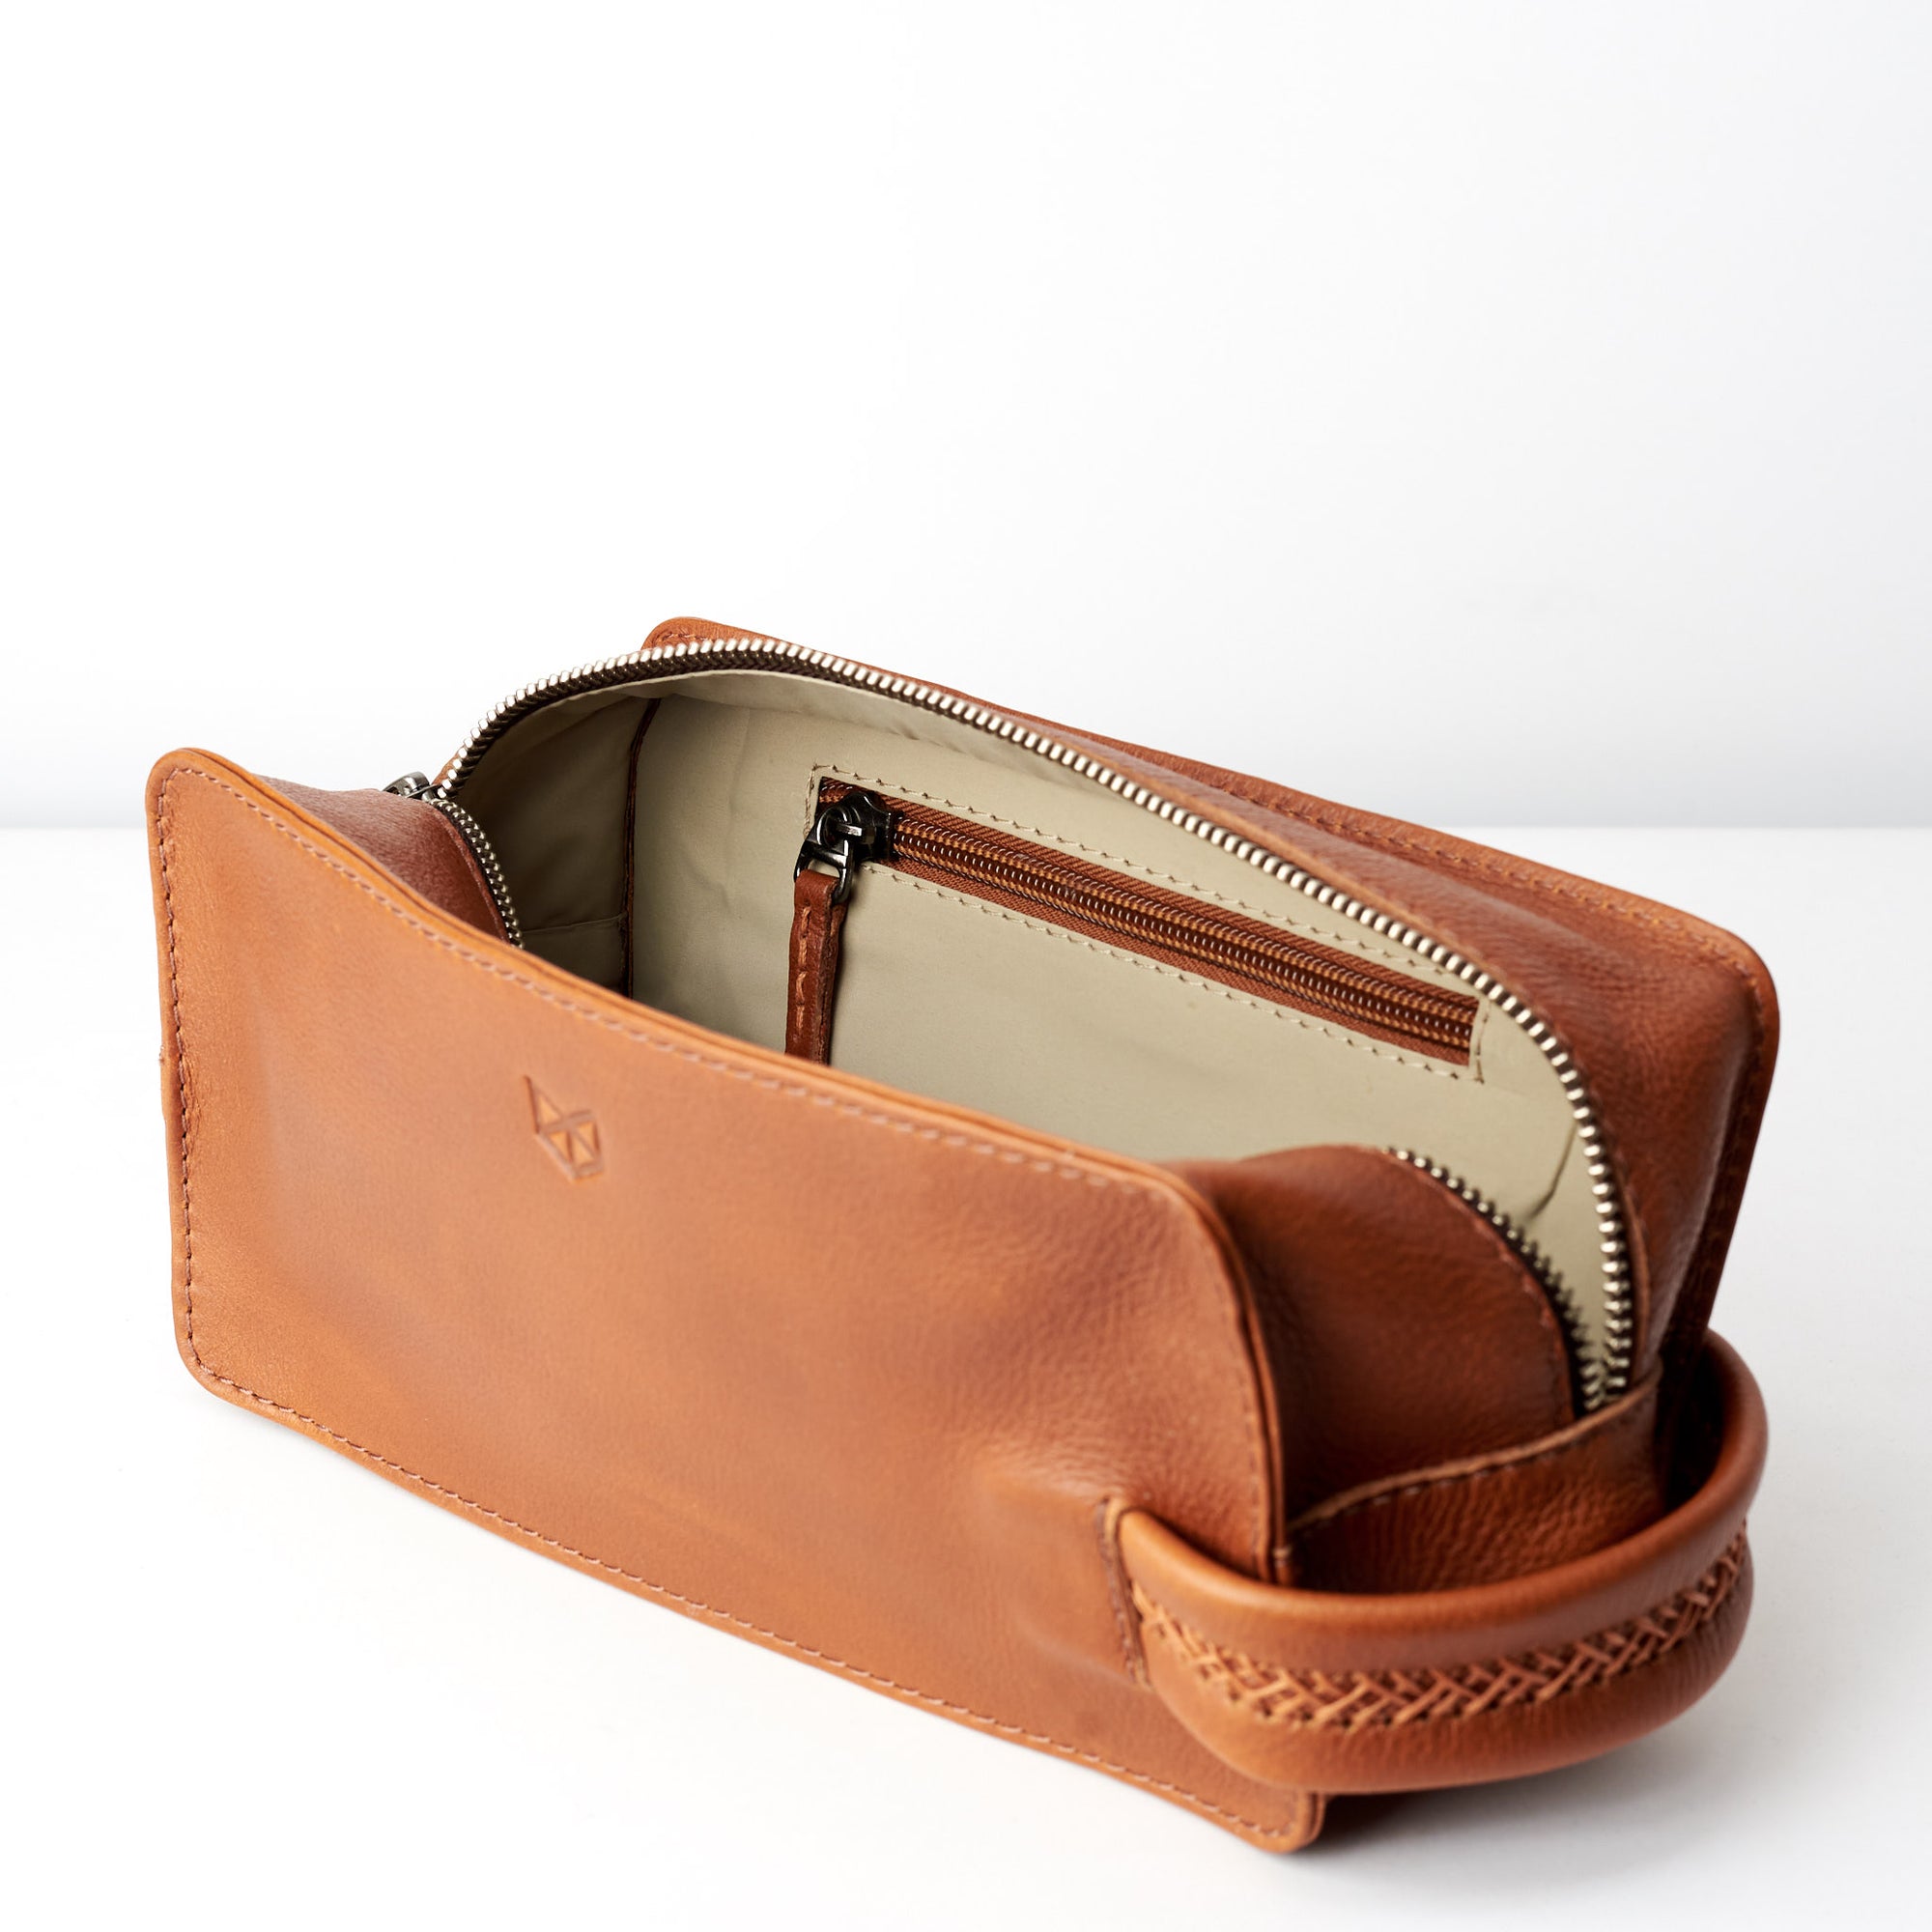 Pocket. Tan leather toiletry, shaving bag with hand stitched handle. Groomsmen gifts. Leather good crafted by Capra Leather 